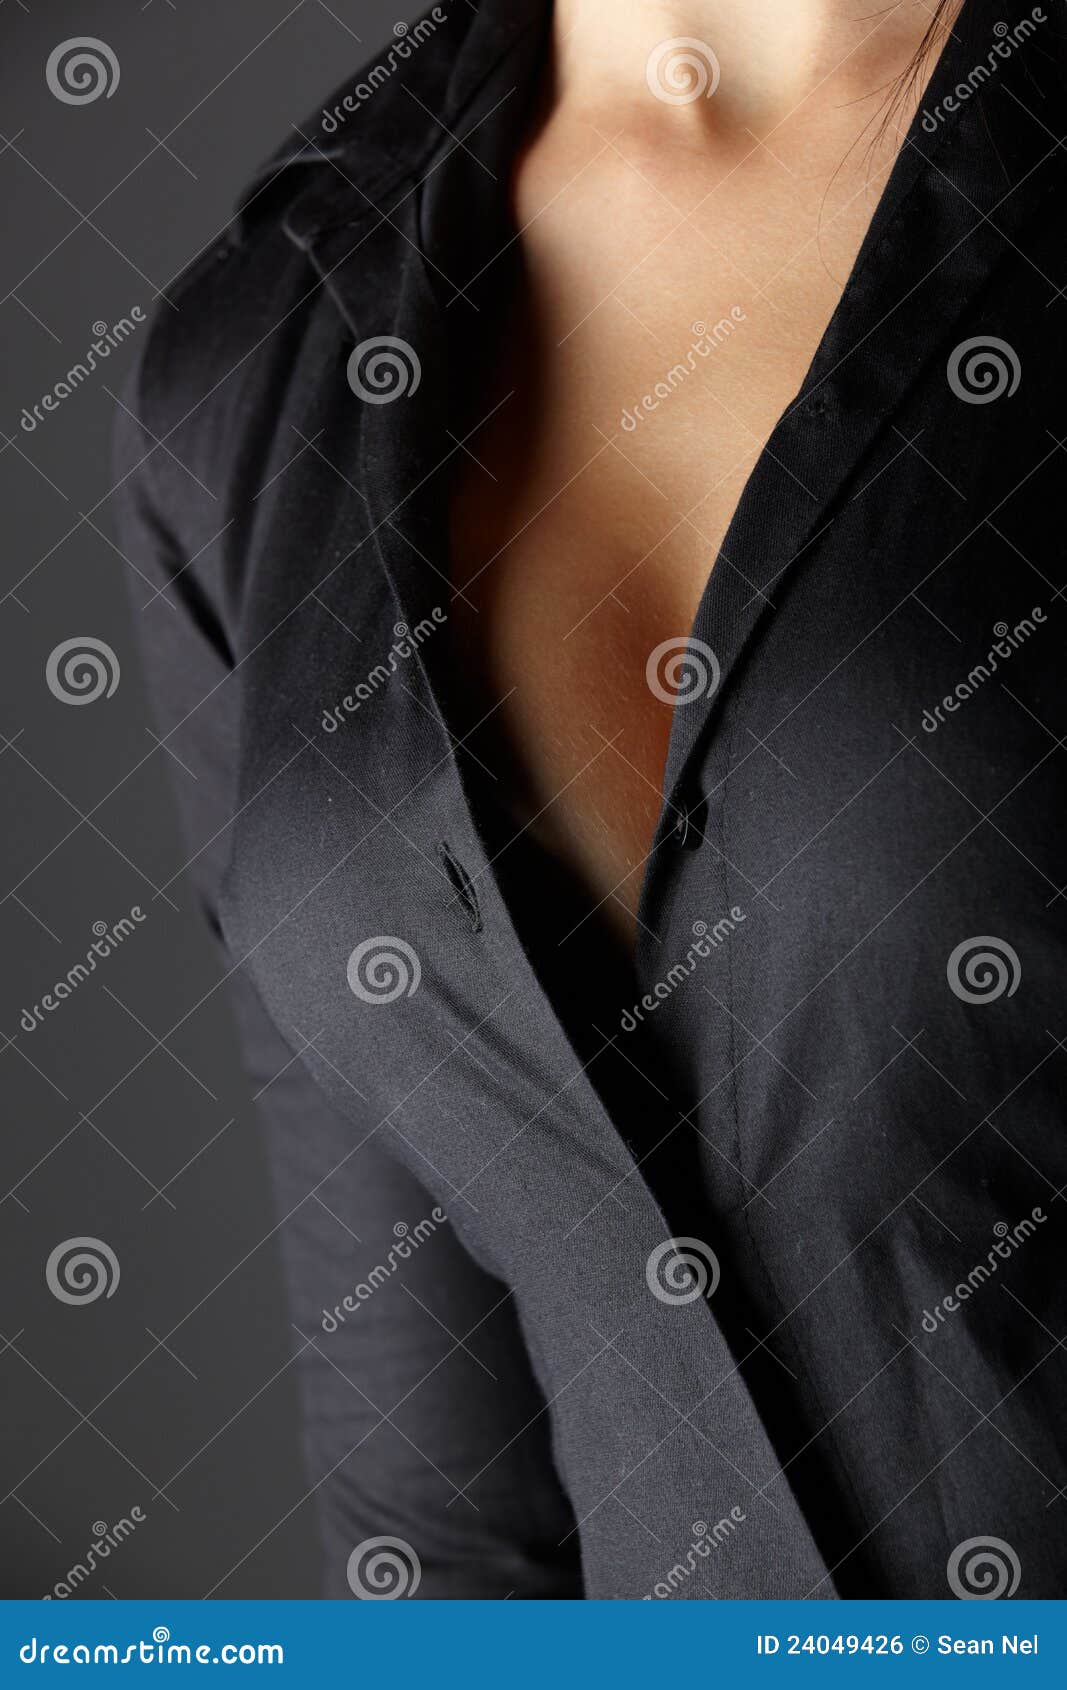 stock-photo-women-with-large-breasts-in-a-white-shirt-542594983